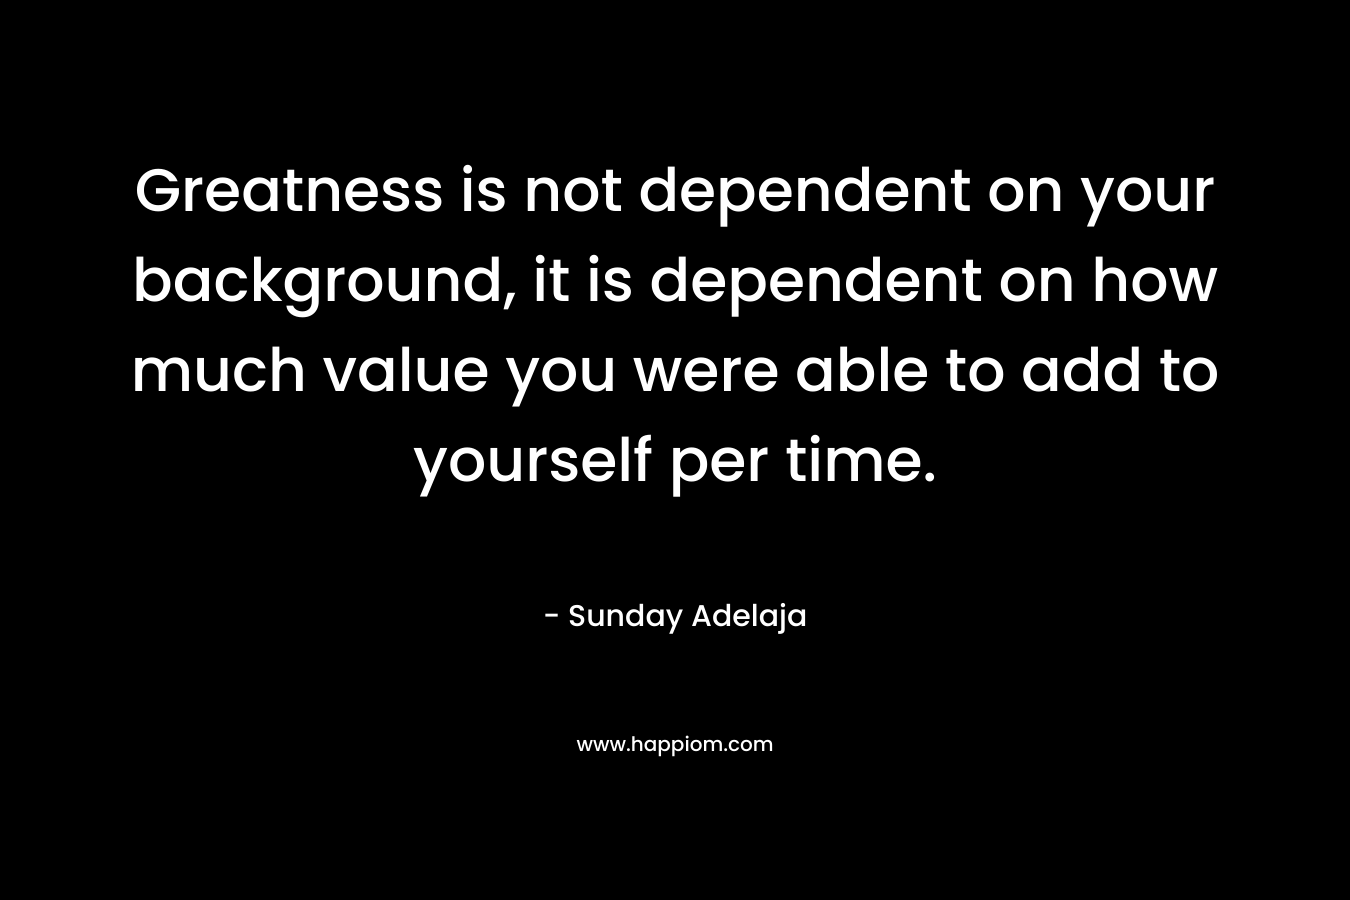 Greatness is not dependent on your background, it is dependent on how much value you were able to add to yourself per time.